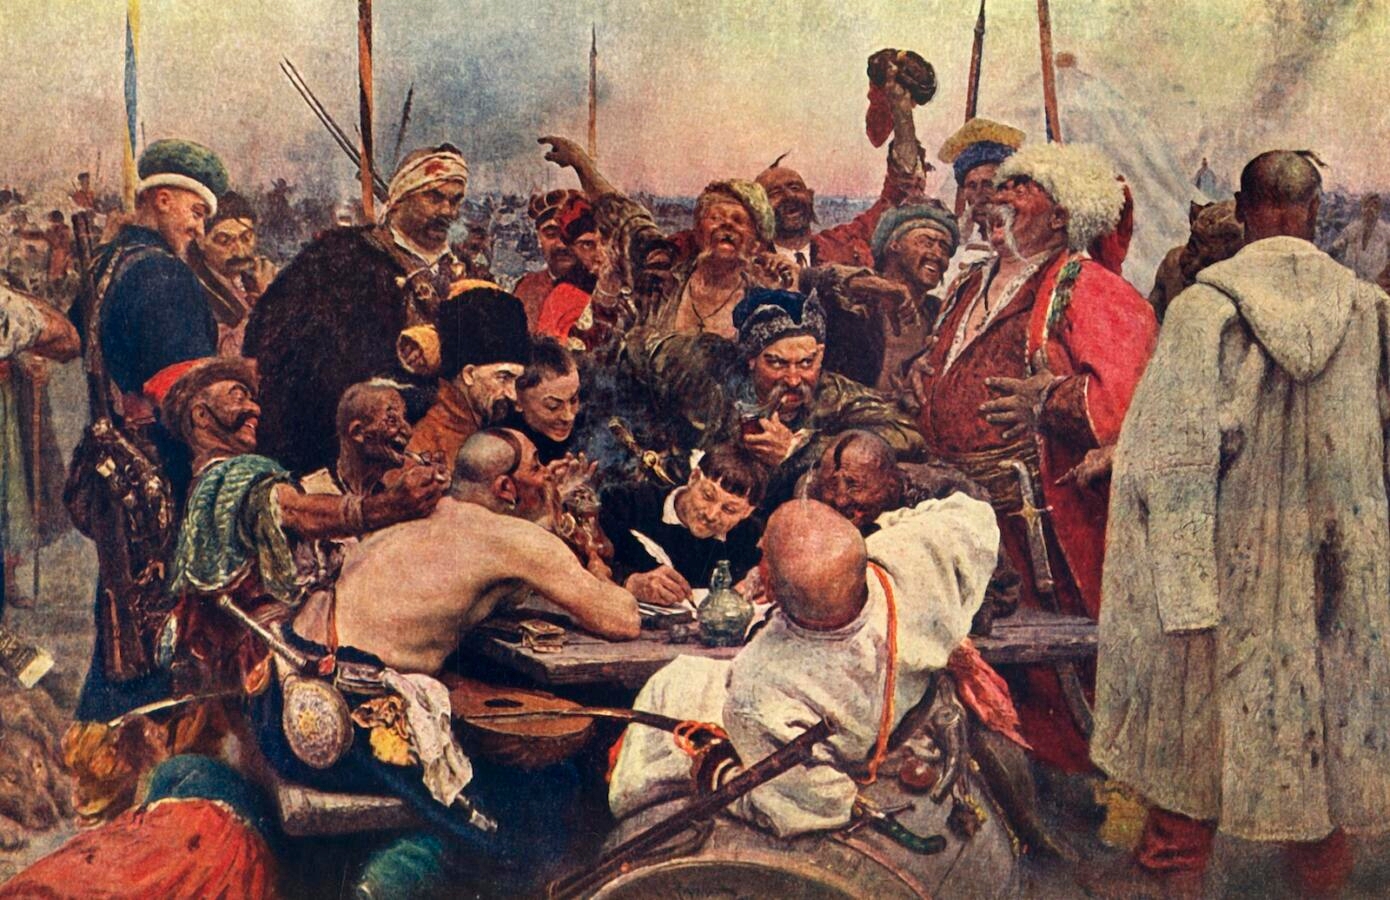 'The Cossacks' Reply to the Sultan (Zaporozhtsy)', c1890, (1939). 'Reply of the Zaporozhian Cossacks to Sultan Mehmed IV of Turkey', also known as 'Cossacks of Saporog Are Drafting a Manifesto', 19th-century imagining of a supposed historical event of 1676, based on the legend of Cossacks sending an apparently rude and insulting reply to an ultimatum from Sultan Mehmed IV of the Ottoman Empire. 'On the right is Taras Bulba (in a white cap), the hero of Gogol's tale of the same name; on the left is Andrei, Taras Bulba's son; almost in the centre sits Ataman (Chief) Serko with a pipe in his mouth'. Ilya Repin (1844-1930) took nearly 20 years to paint the picture, for which Tsar Alexander III paid him 35,000 rubles, at the time the greatest sum ever paid for a Russian painting. In the collection of The State Russian Museum, St Petersburg, Russia. From "The Russian State Museum". [State Art Publishers, Moscow and Leningrad, 1939]